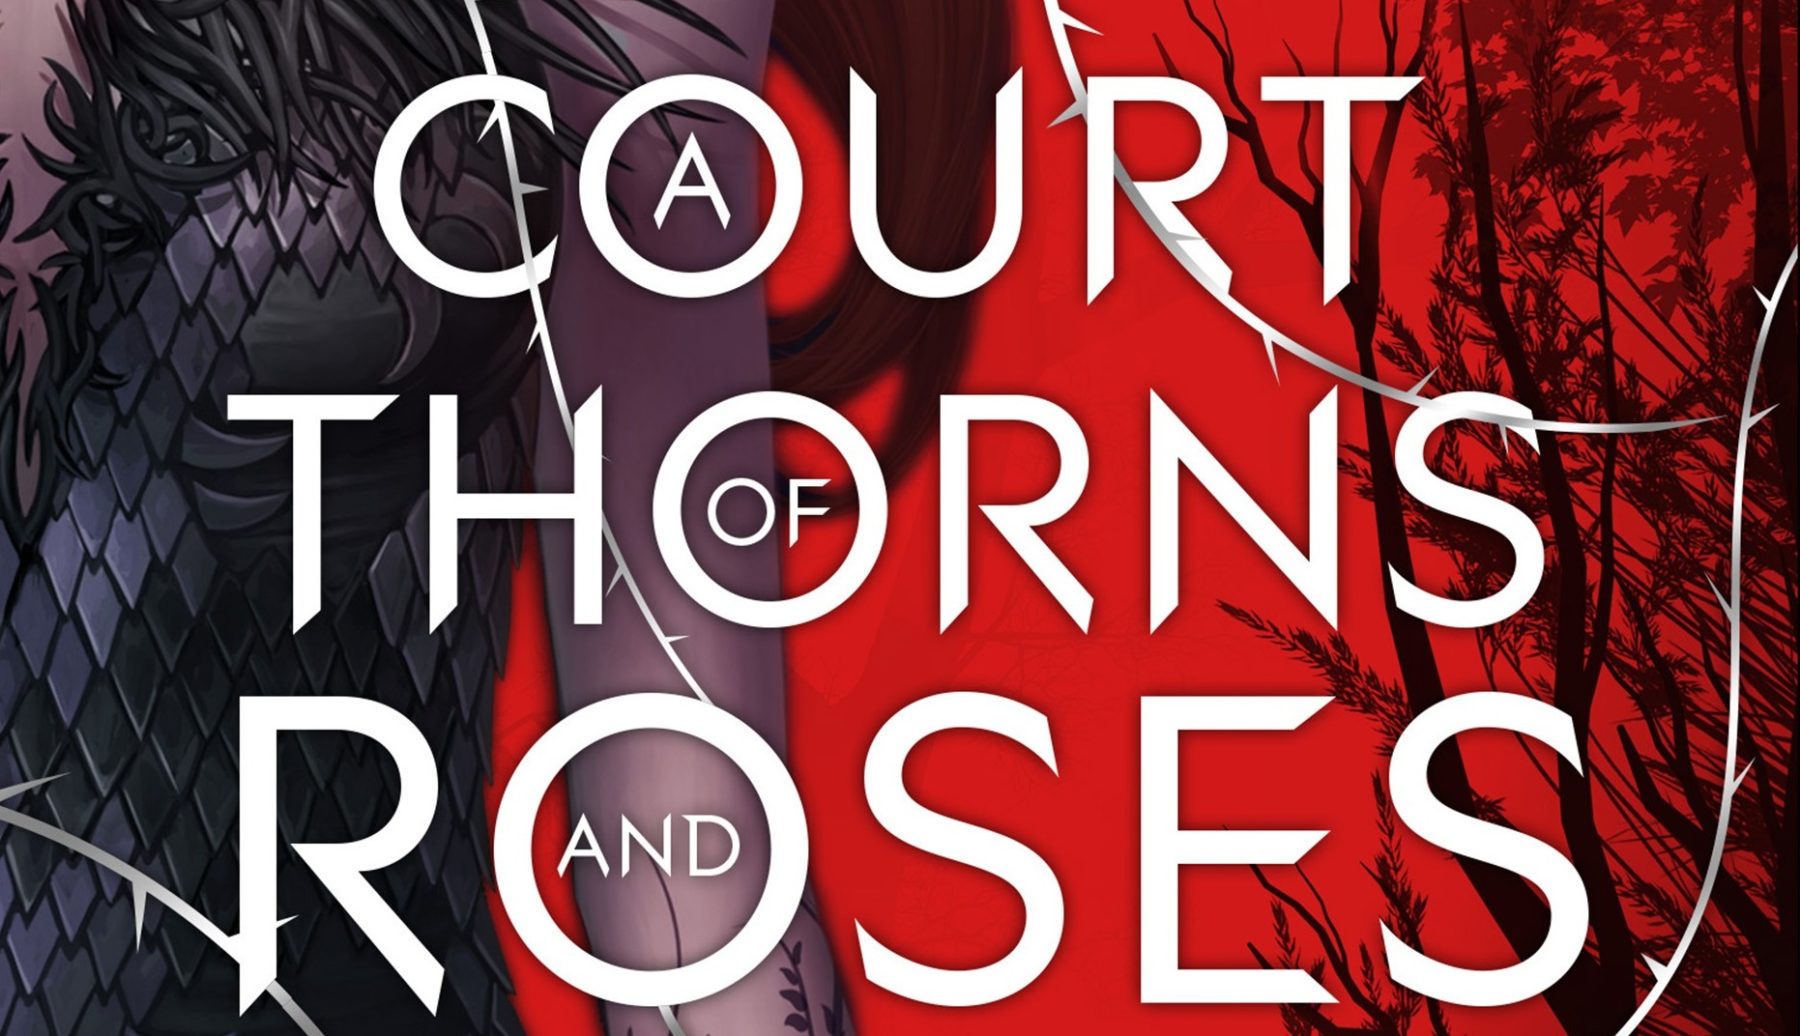 Constantin Film to adapt YA fantasy A Court of Thorns and Roses